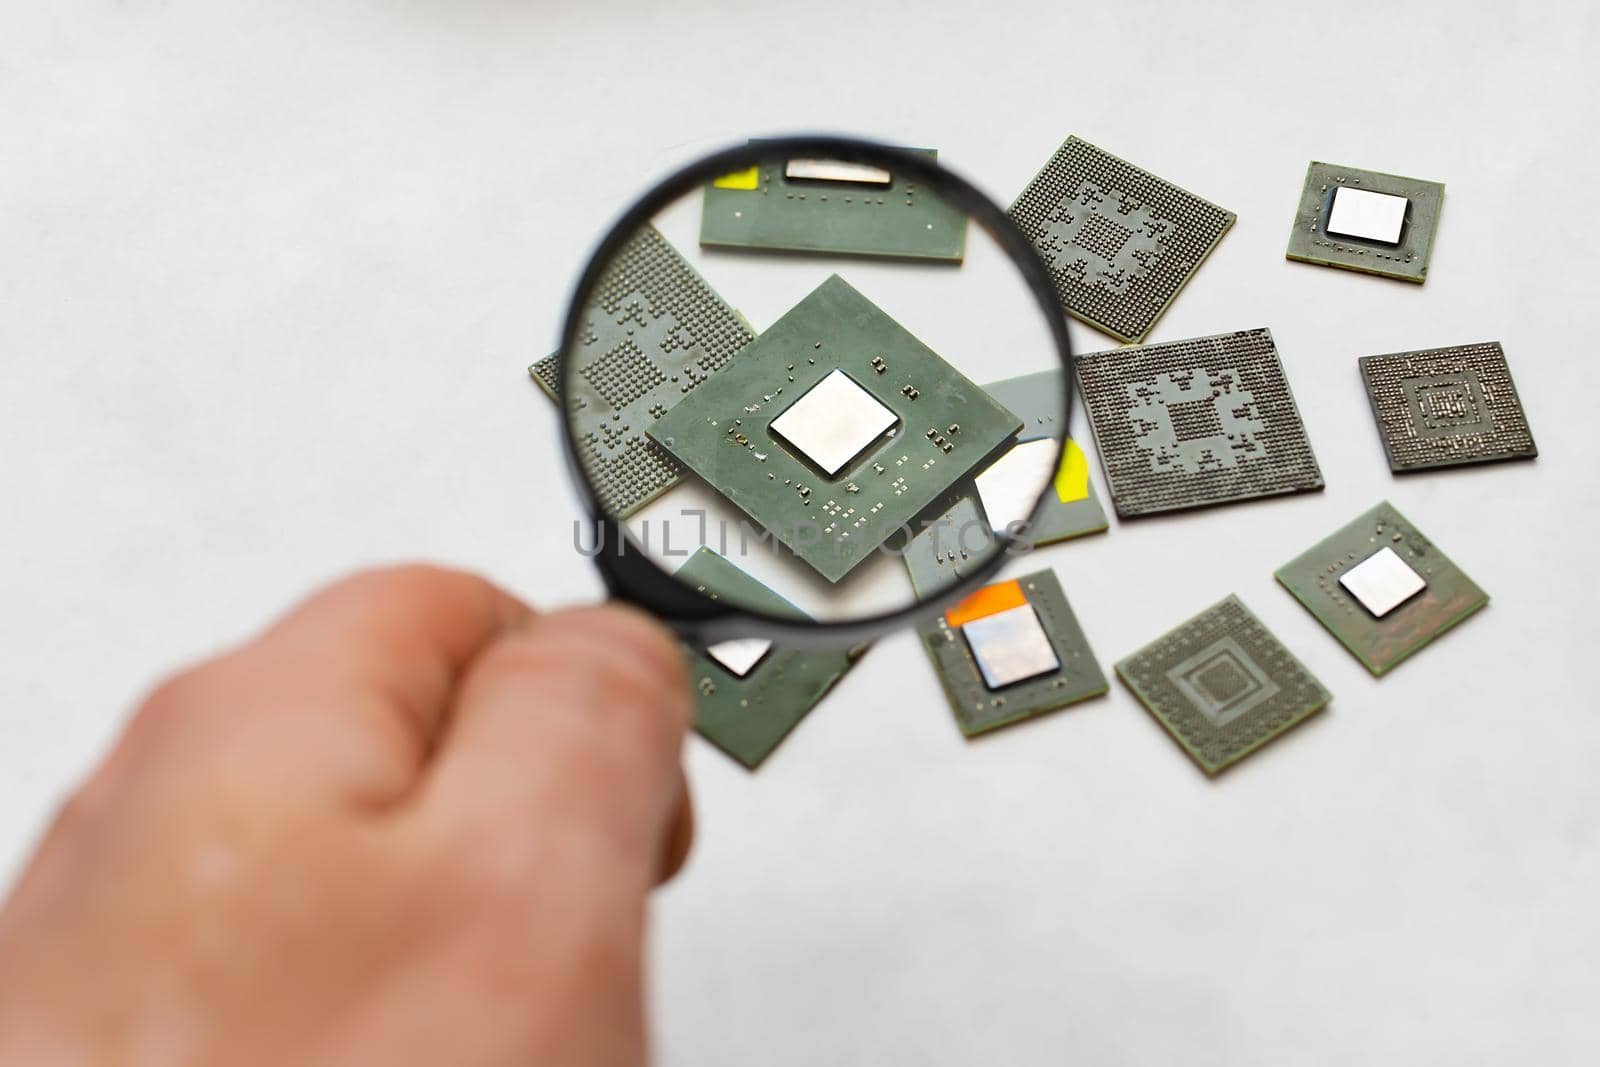 computer chip, a microprocessor that a person views through a magnifying glass